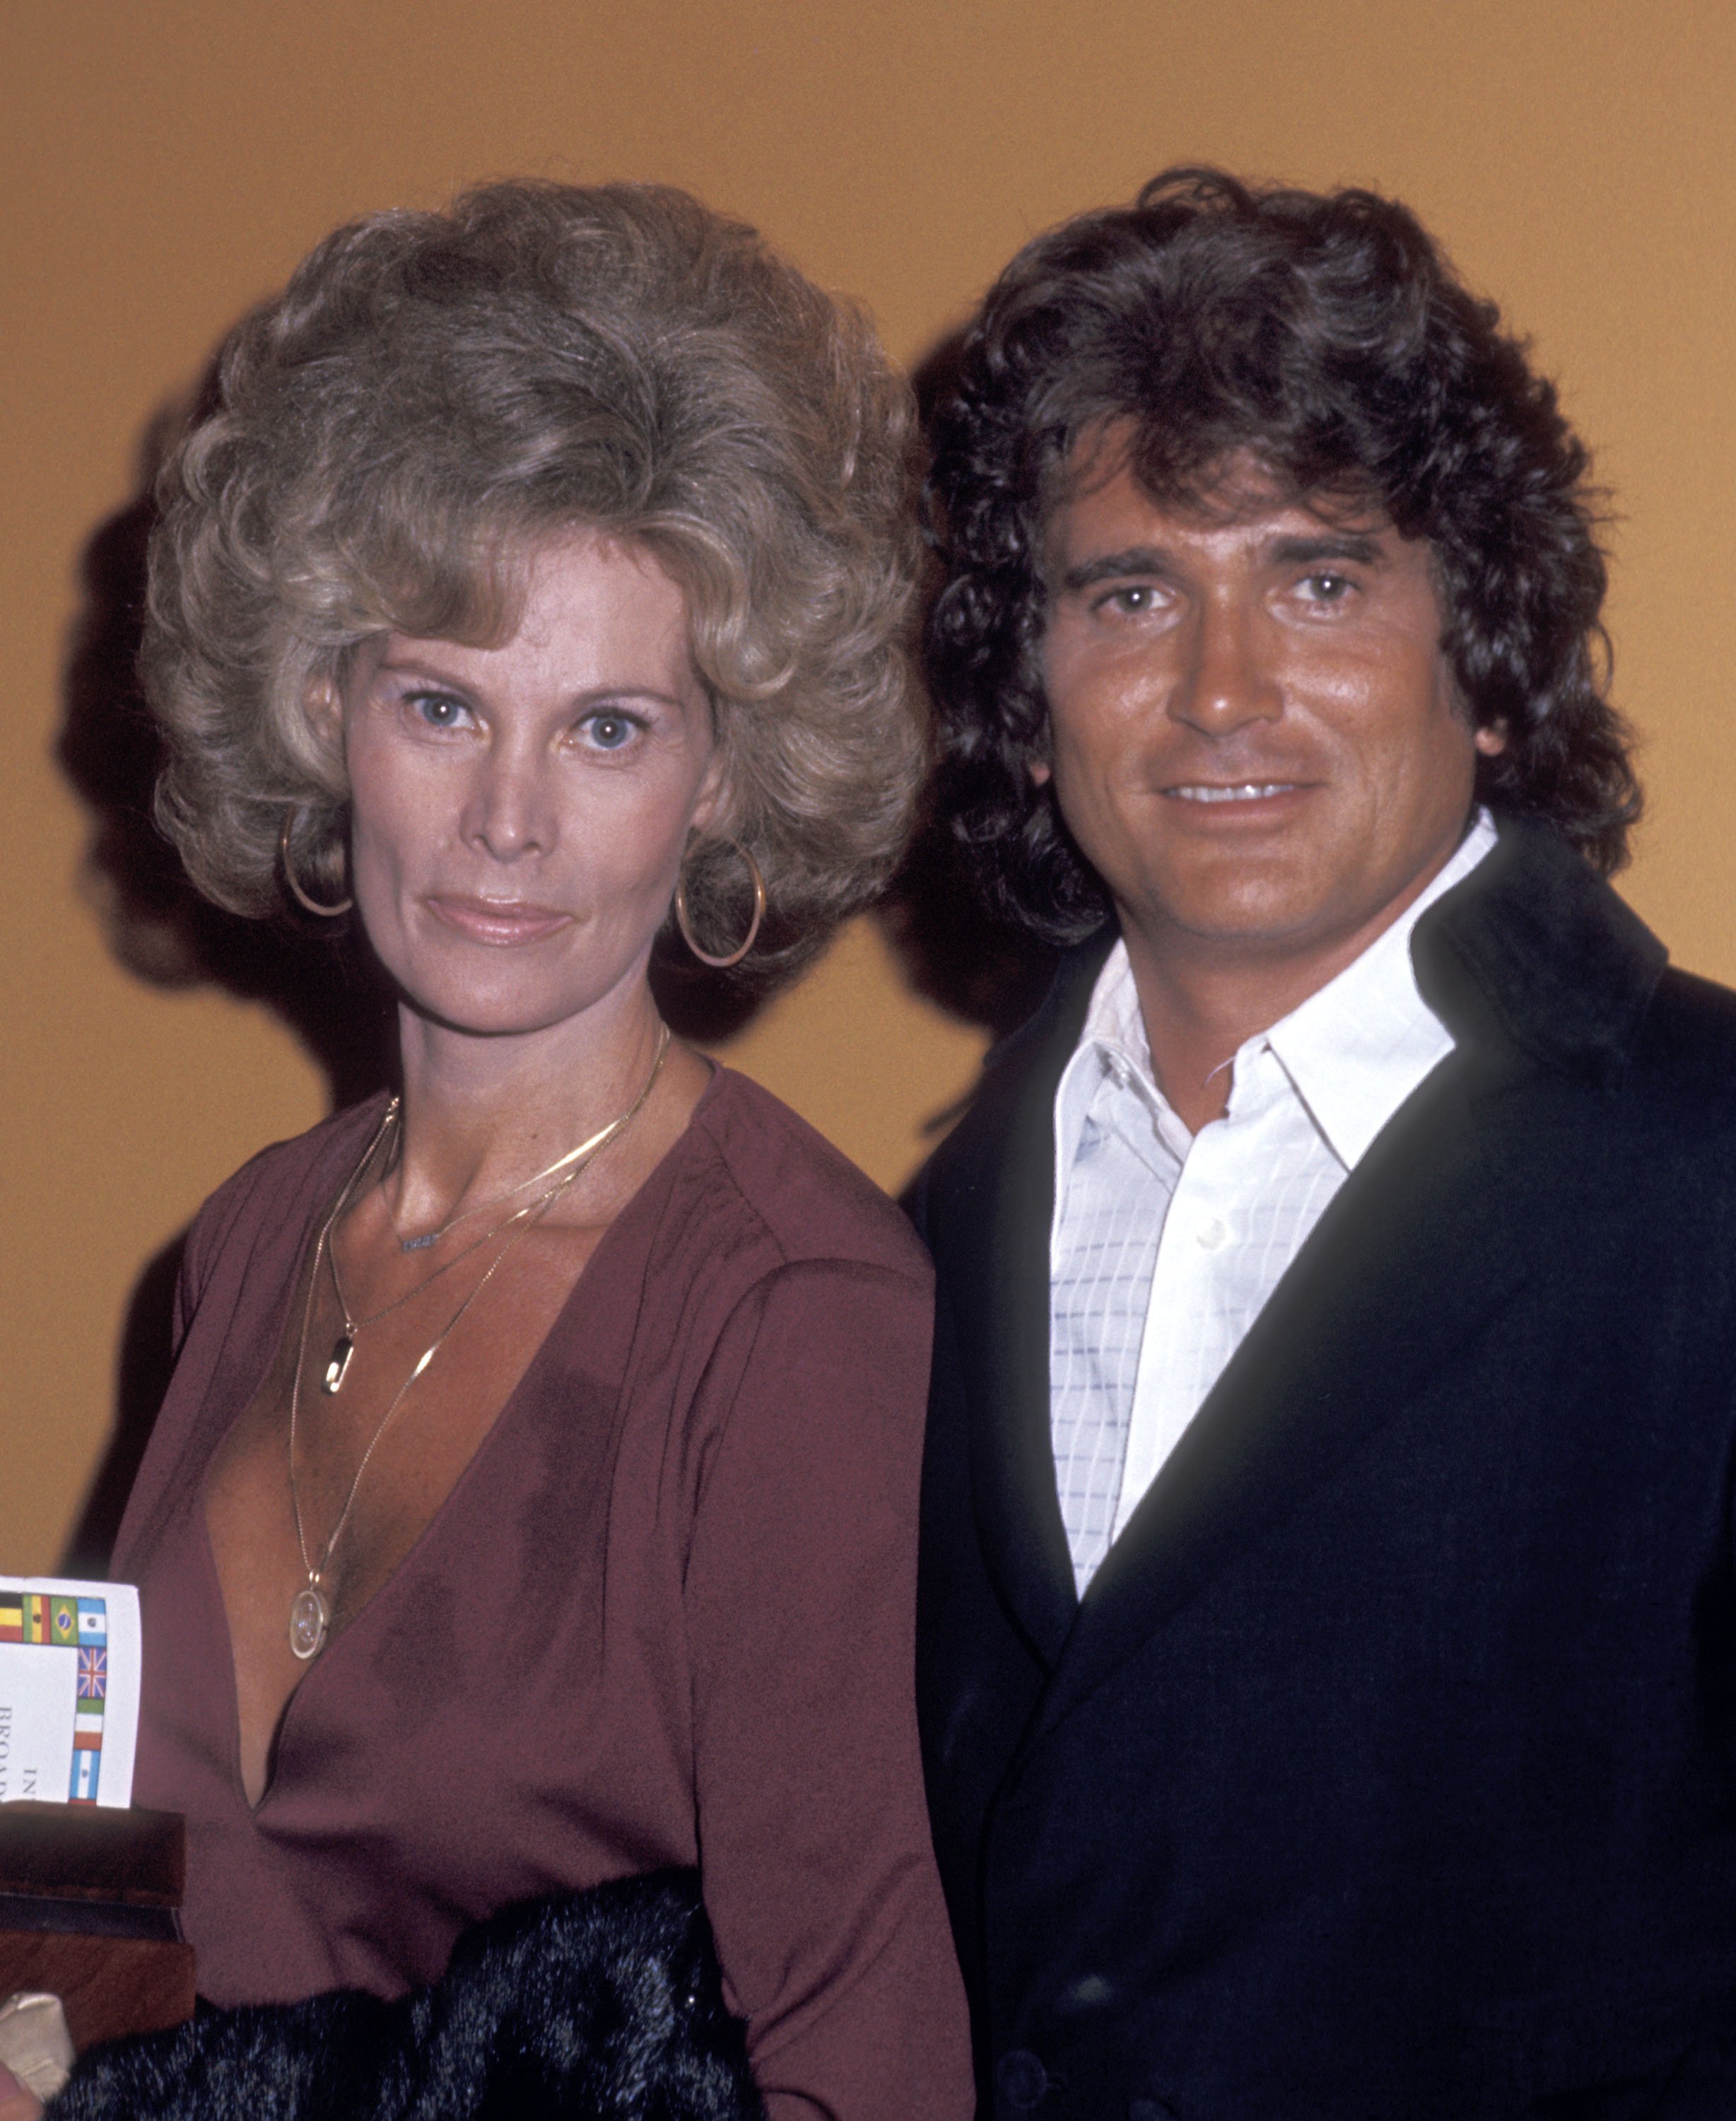 Lynn Noe and Michael Landon at the Hollywood Radio and Television Society's 16th Annual International Broadcasting Awards on March 4, 1976, in Los Angeles, California. | Source: Getty Images